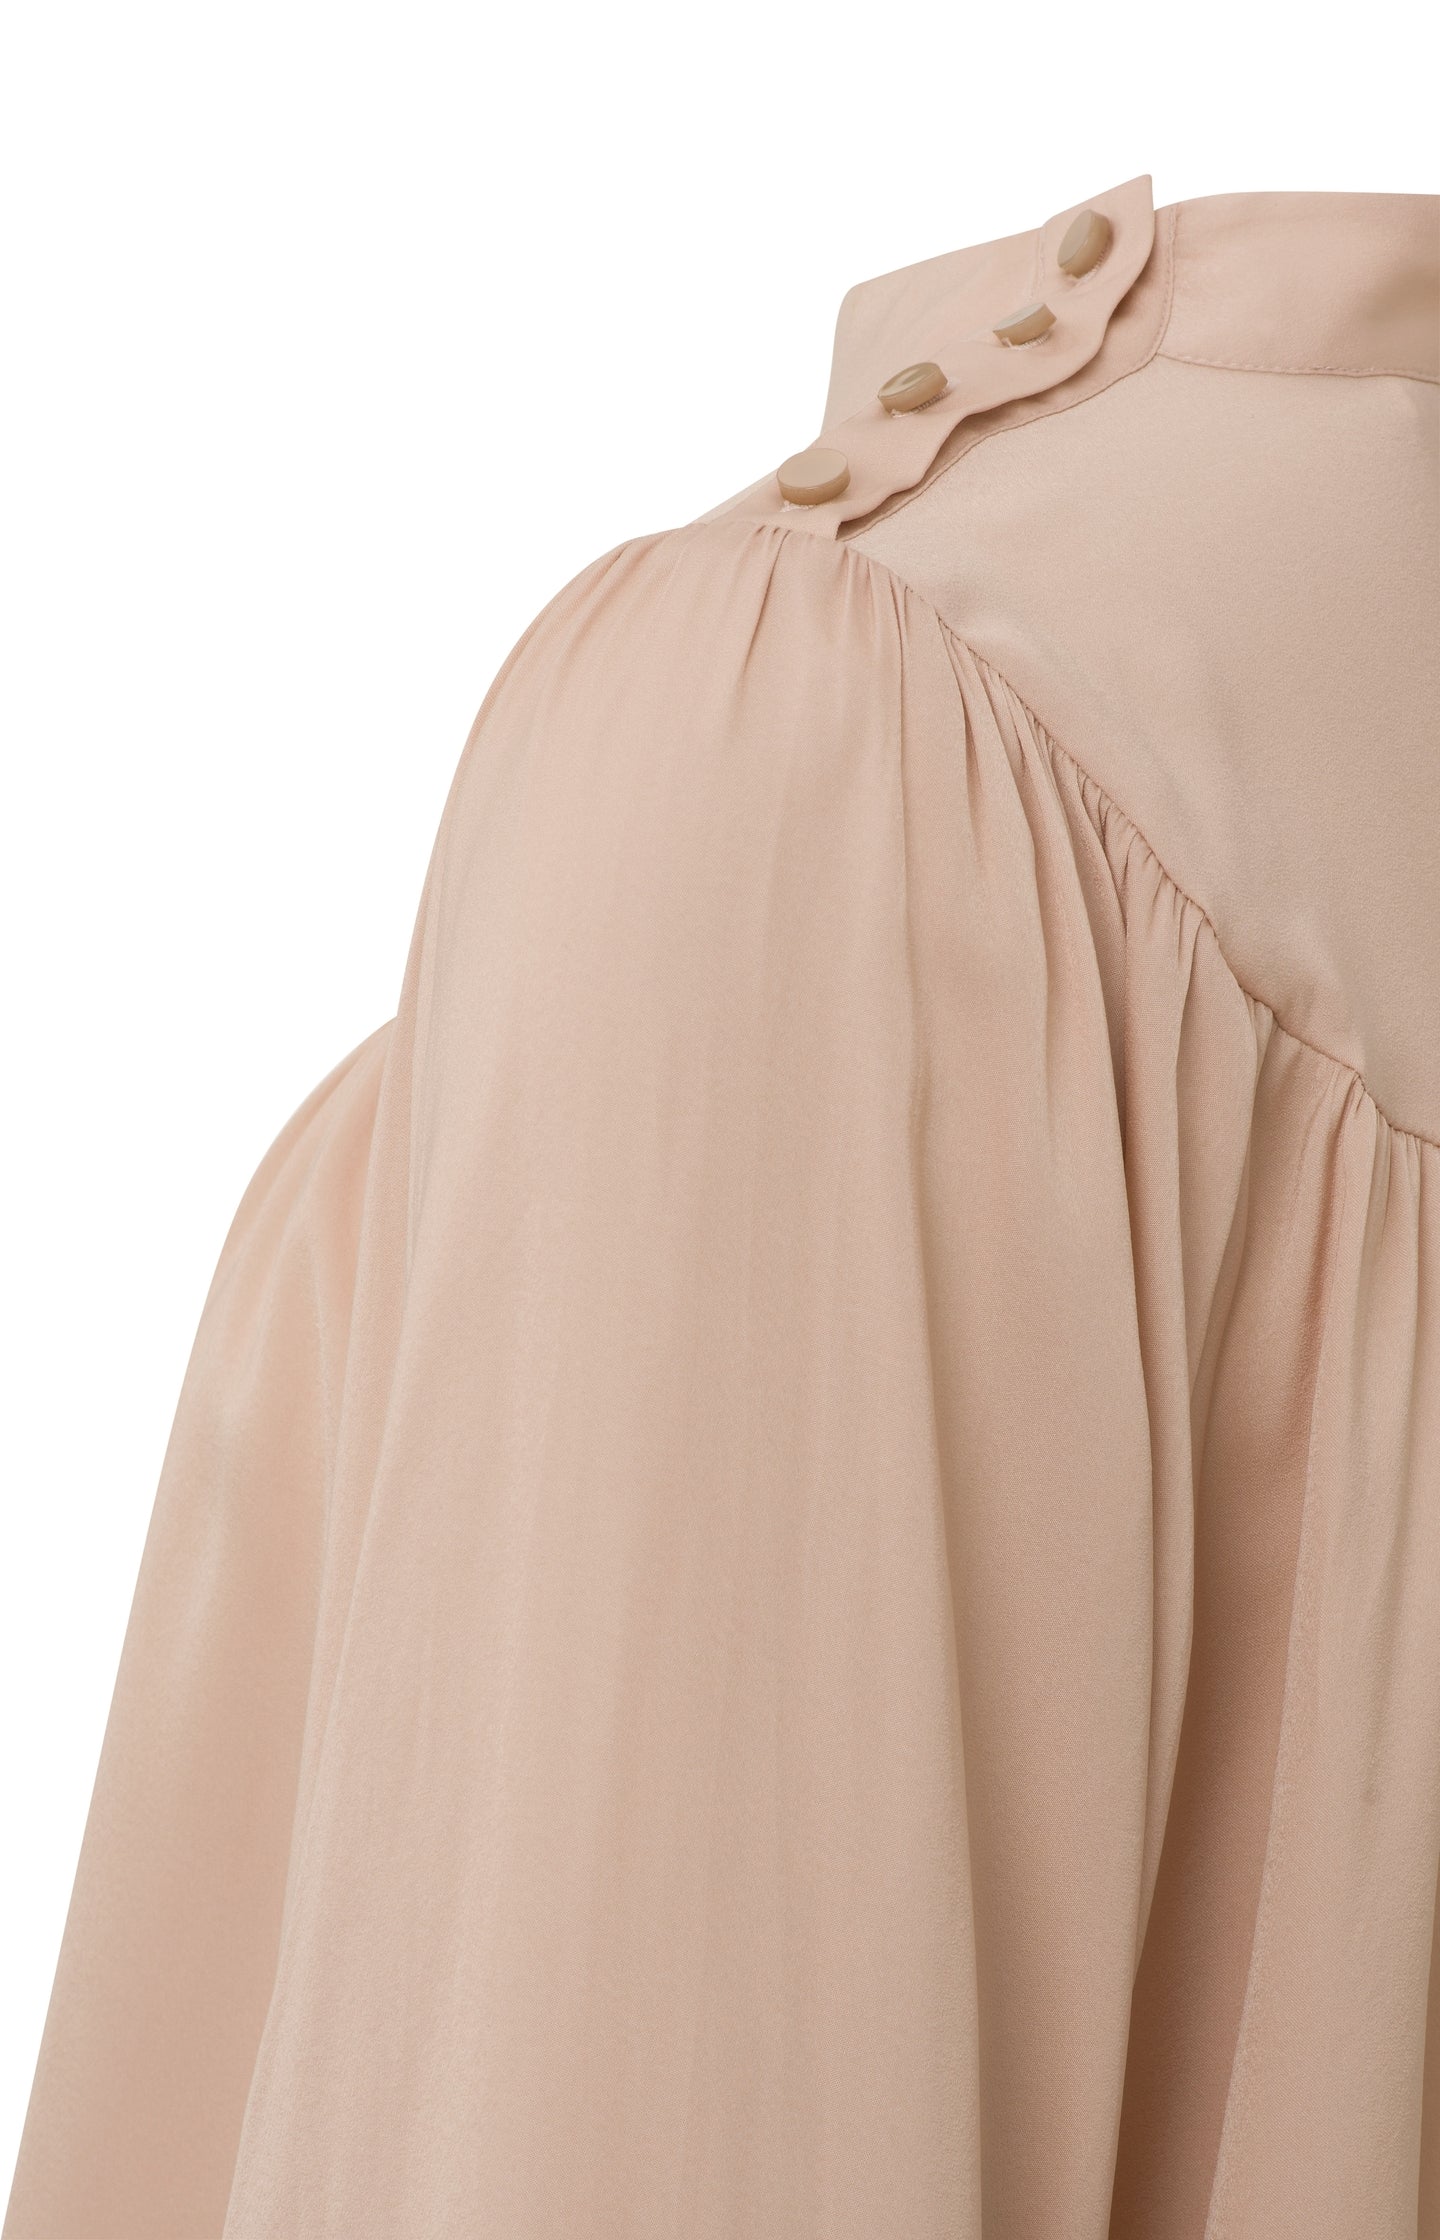 Top with high neck, long balloon sleeves and shoulder button